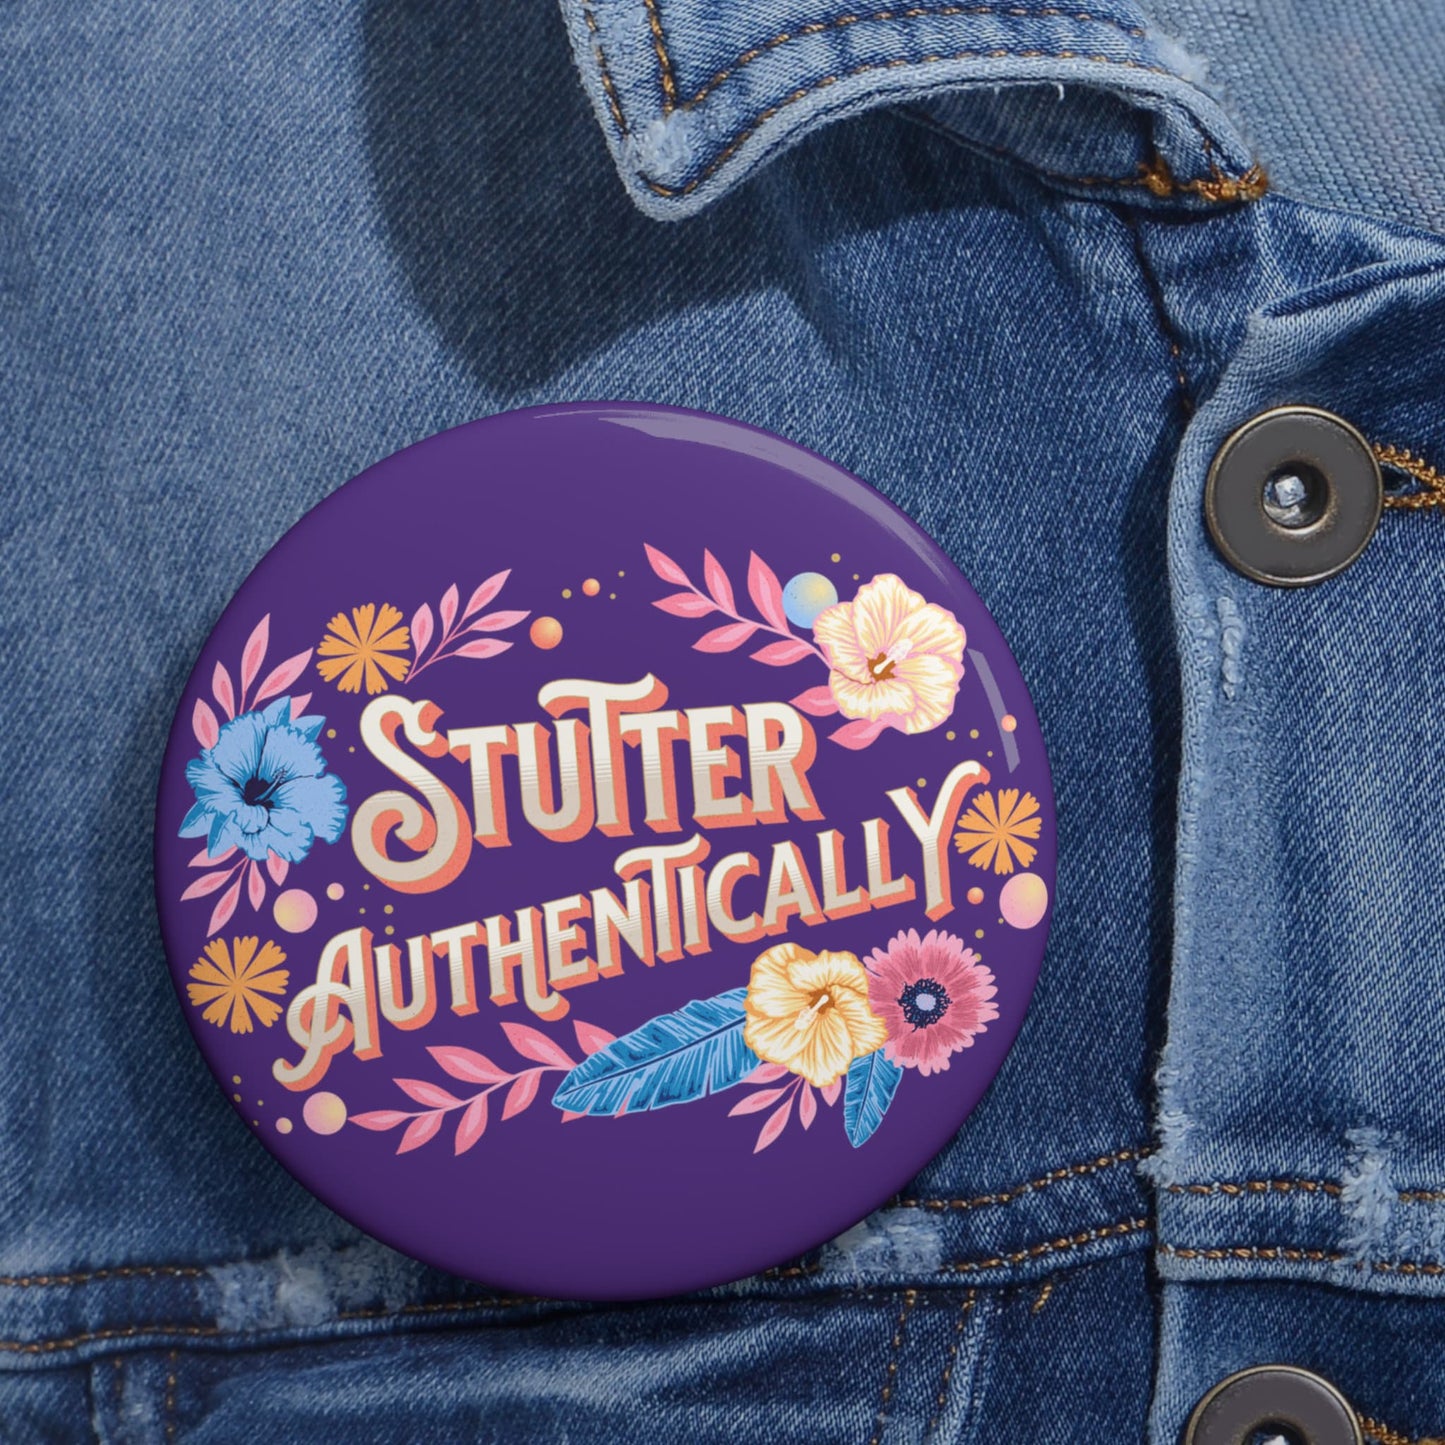 Stutter Authentically Button 2.25" or 3"